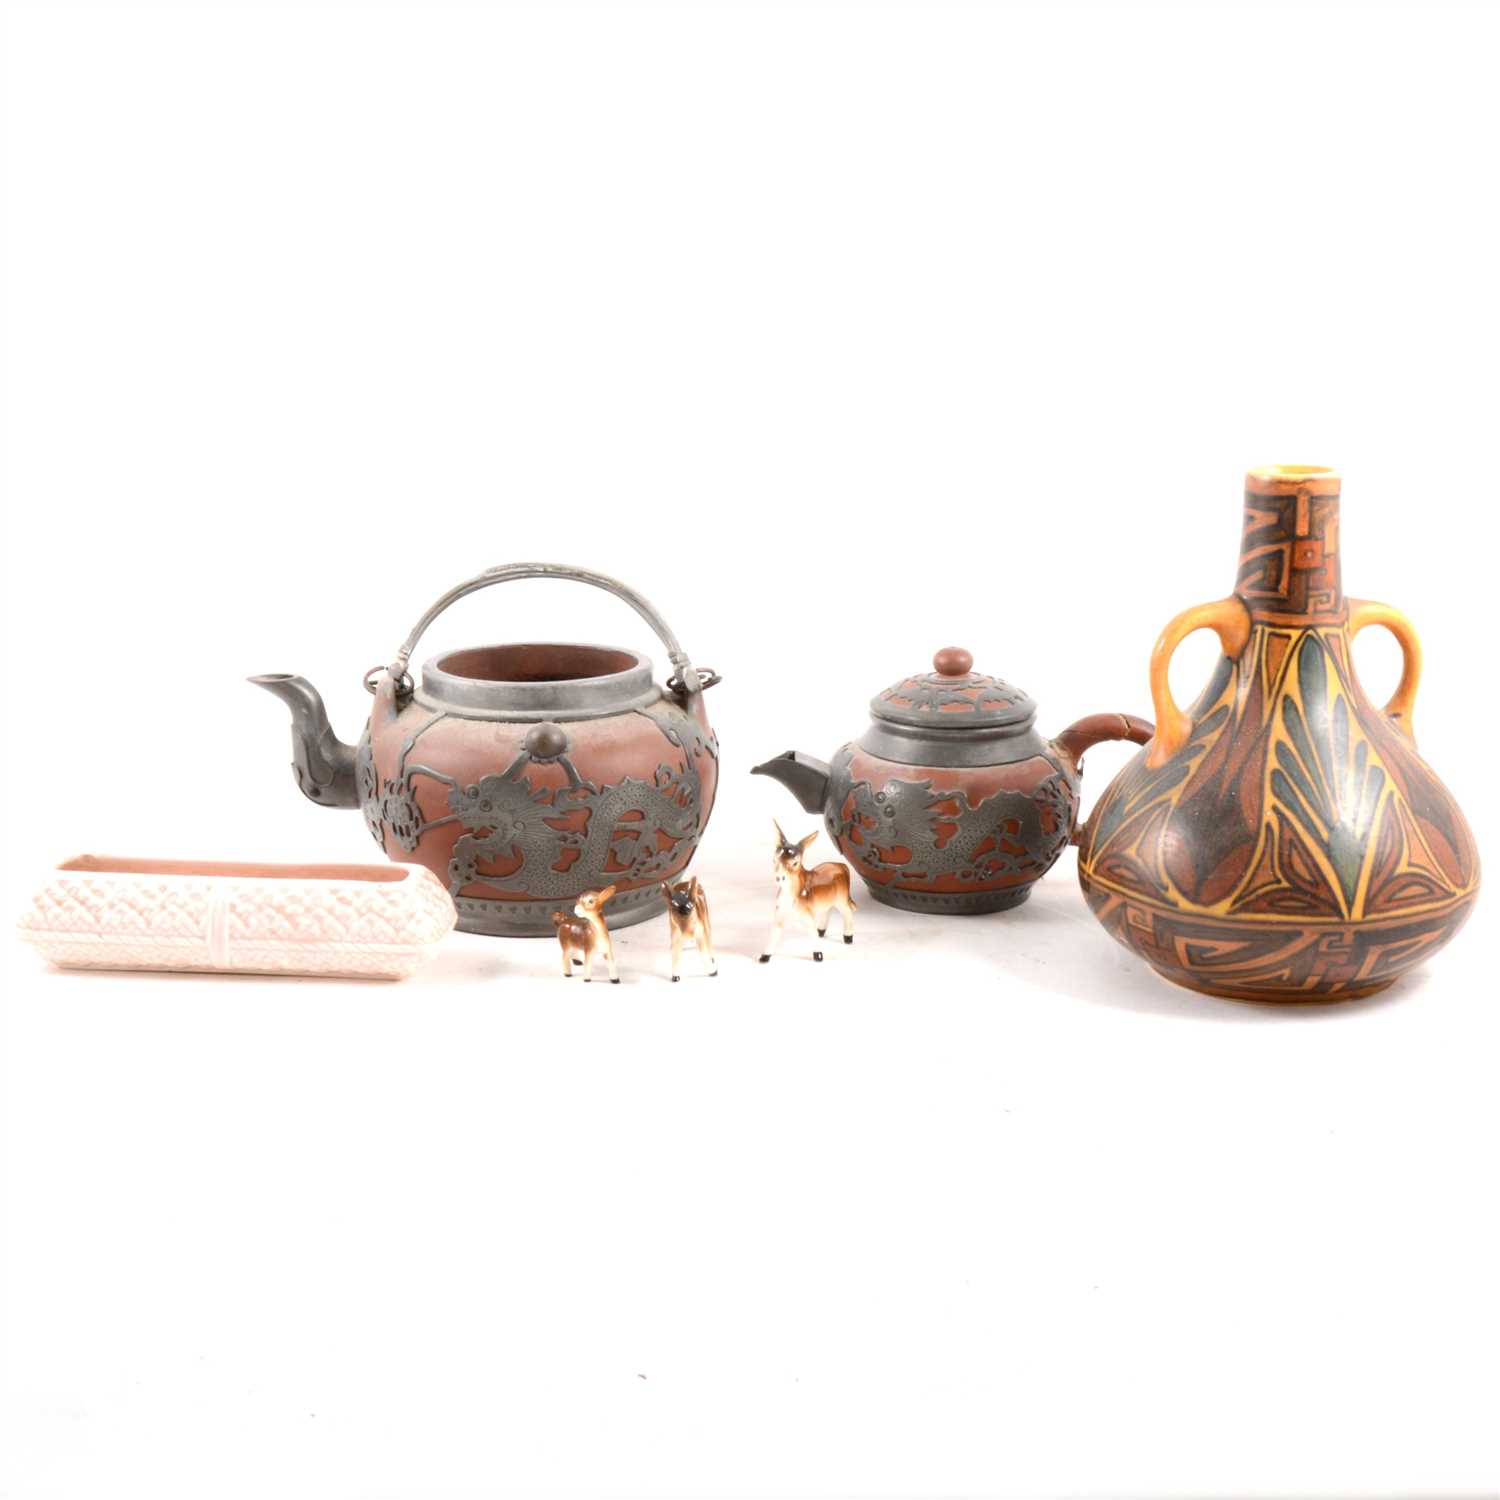 Lot 36 - A Shelley part coffee set, three-piece Chinese terracotta base tea set, and other ceramics